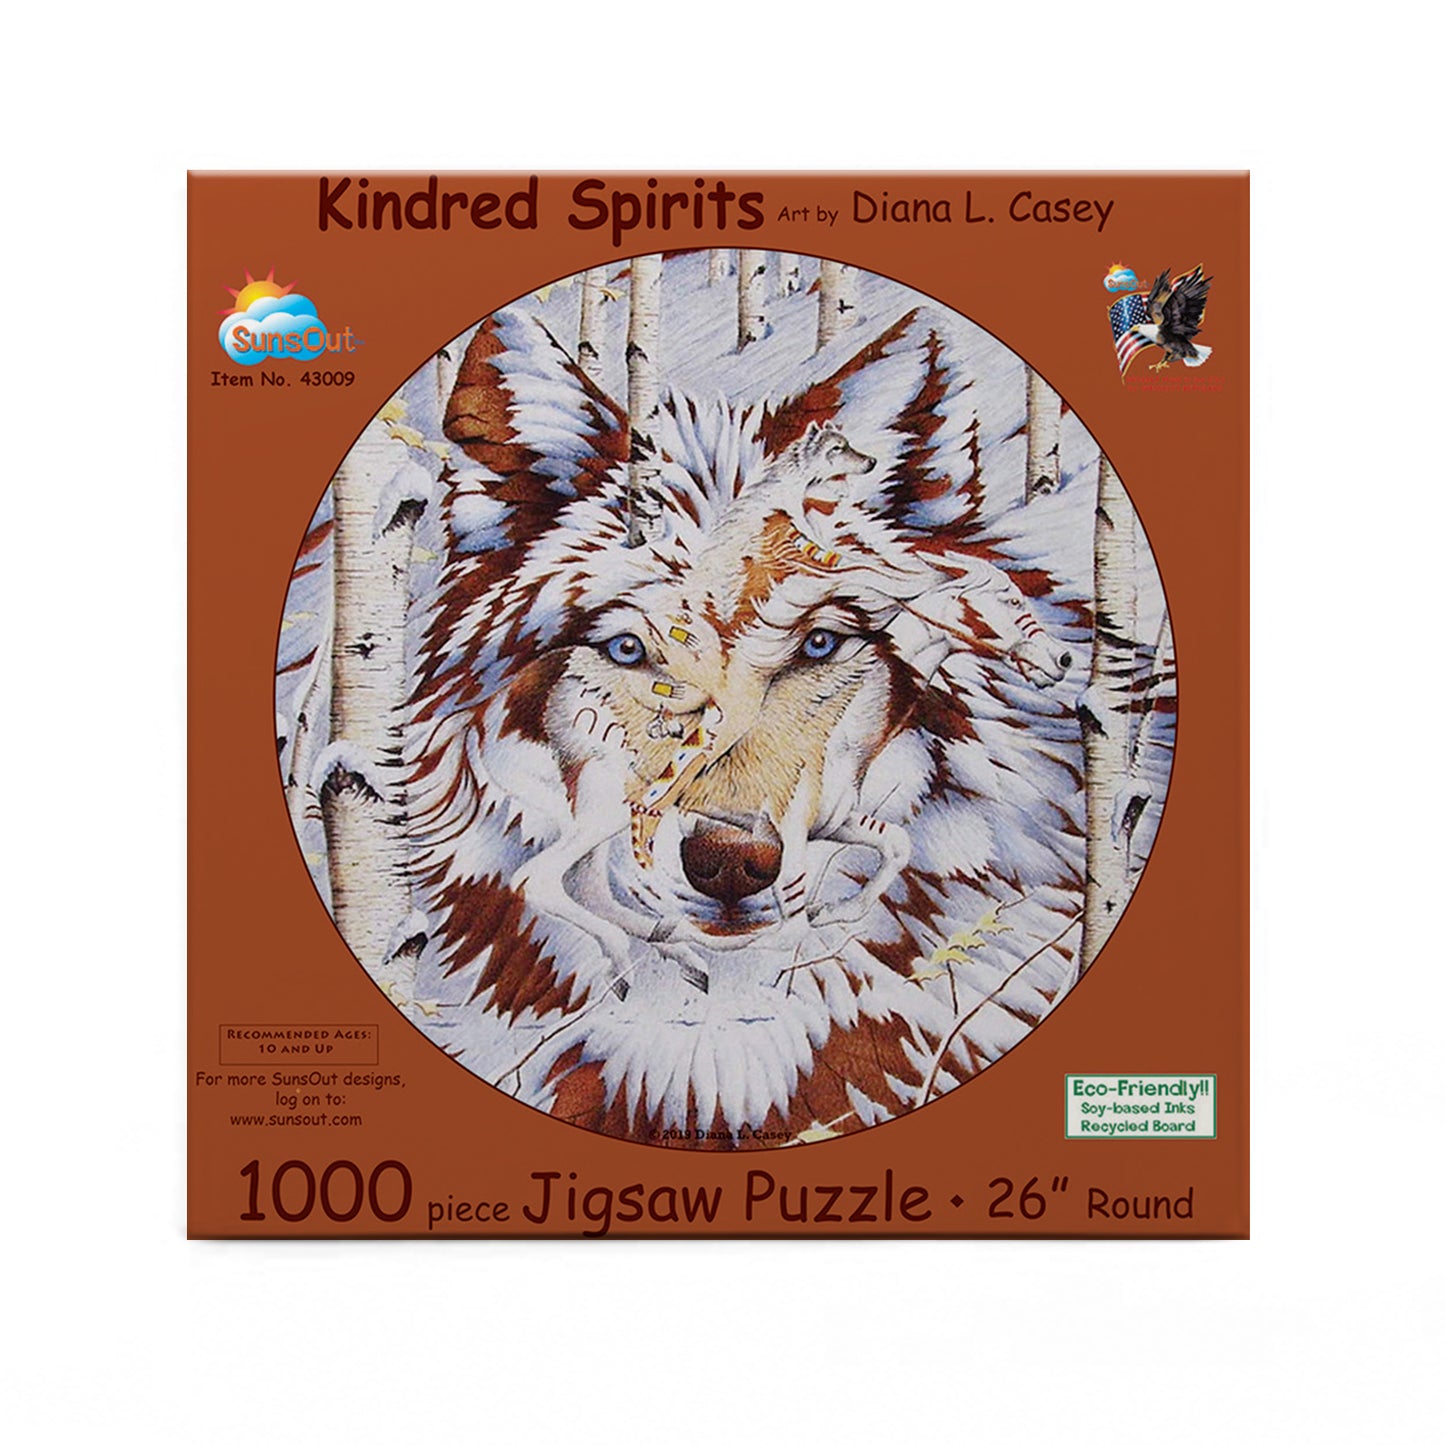 Kindred Spirits 1000 - 1000 Piece Jigsaw Puzzle